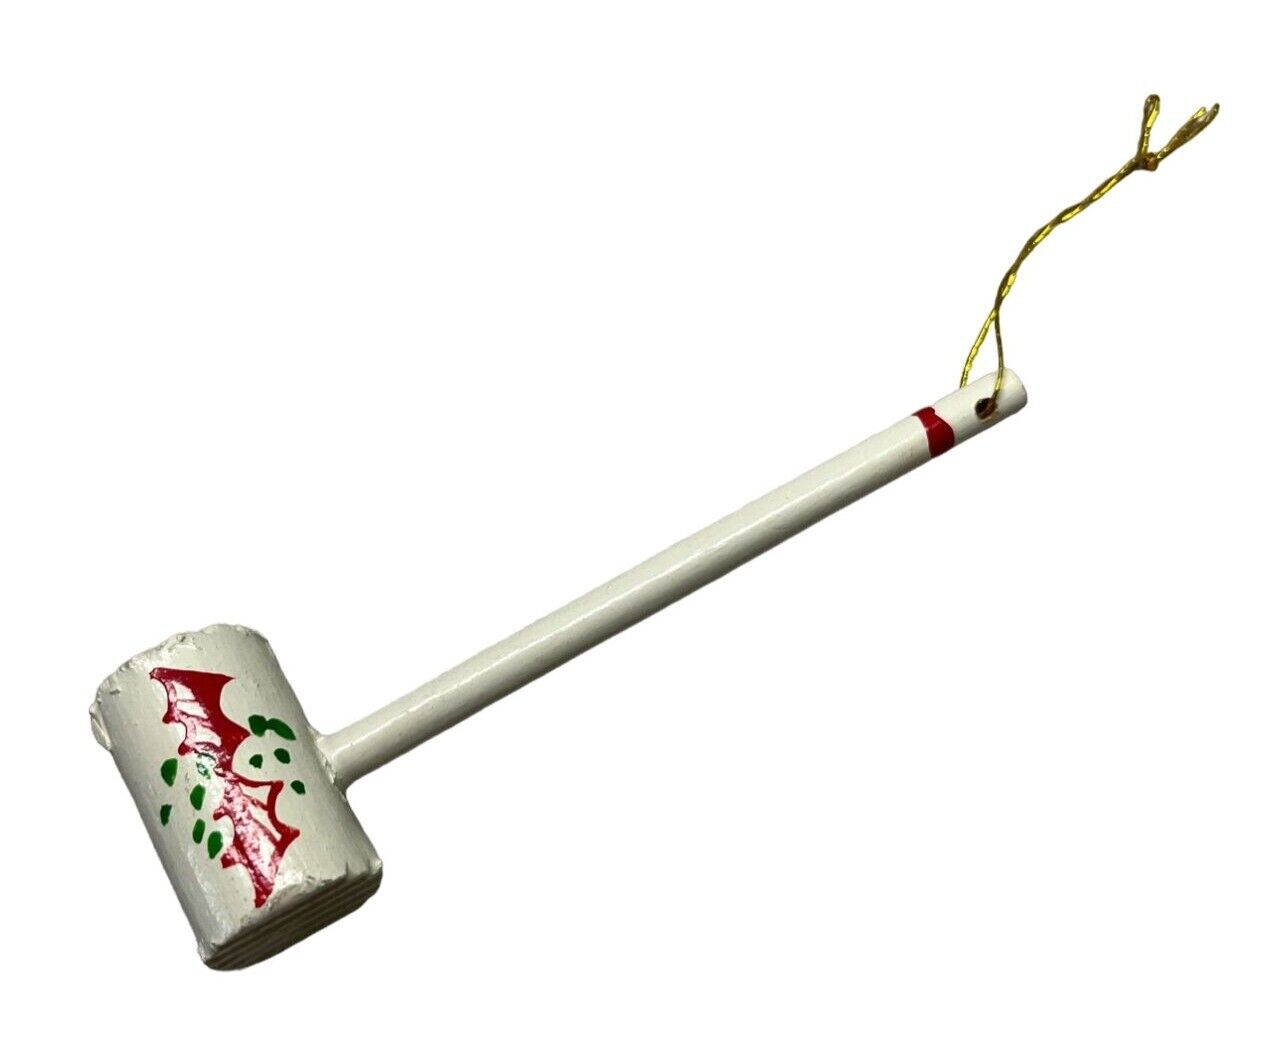 Vintage Holly Croquet Mallet Christmas Tree Ornament Wooden 4.25 Inch